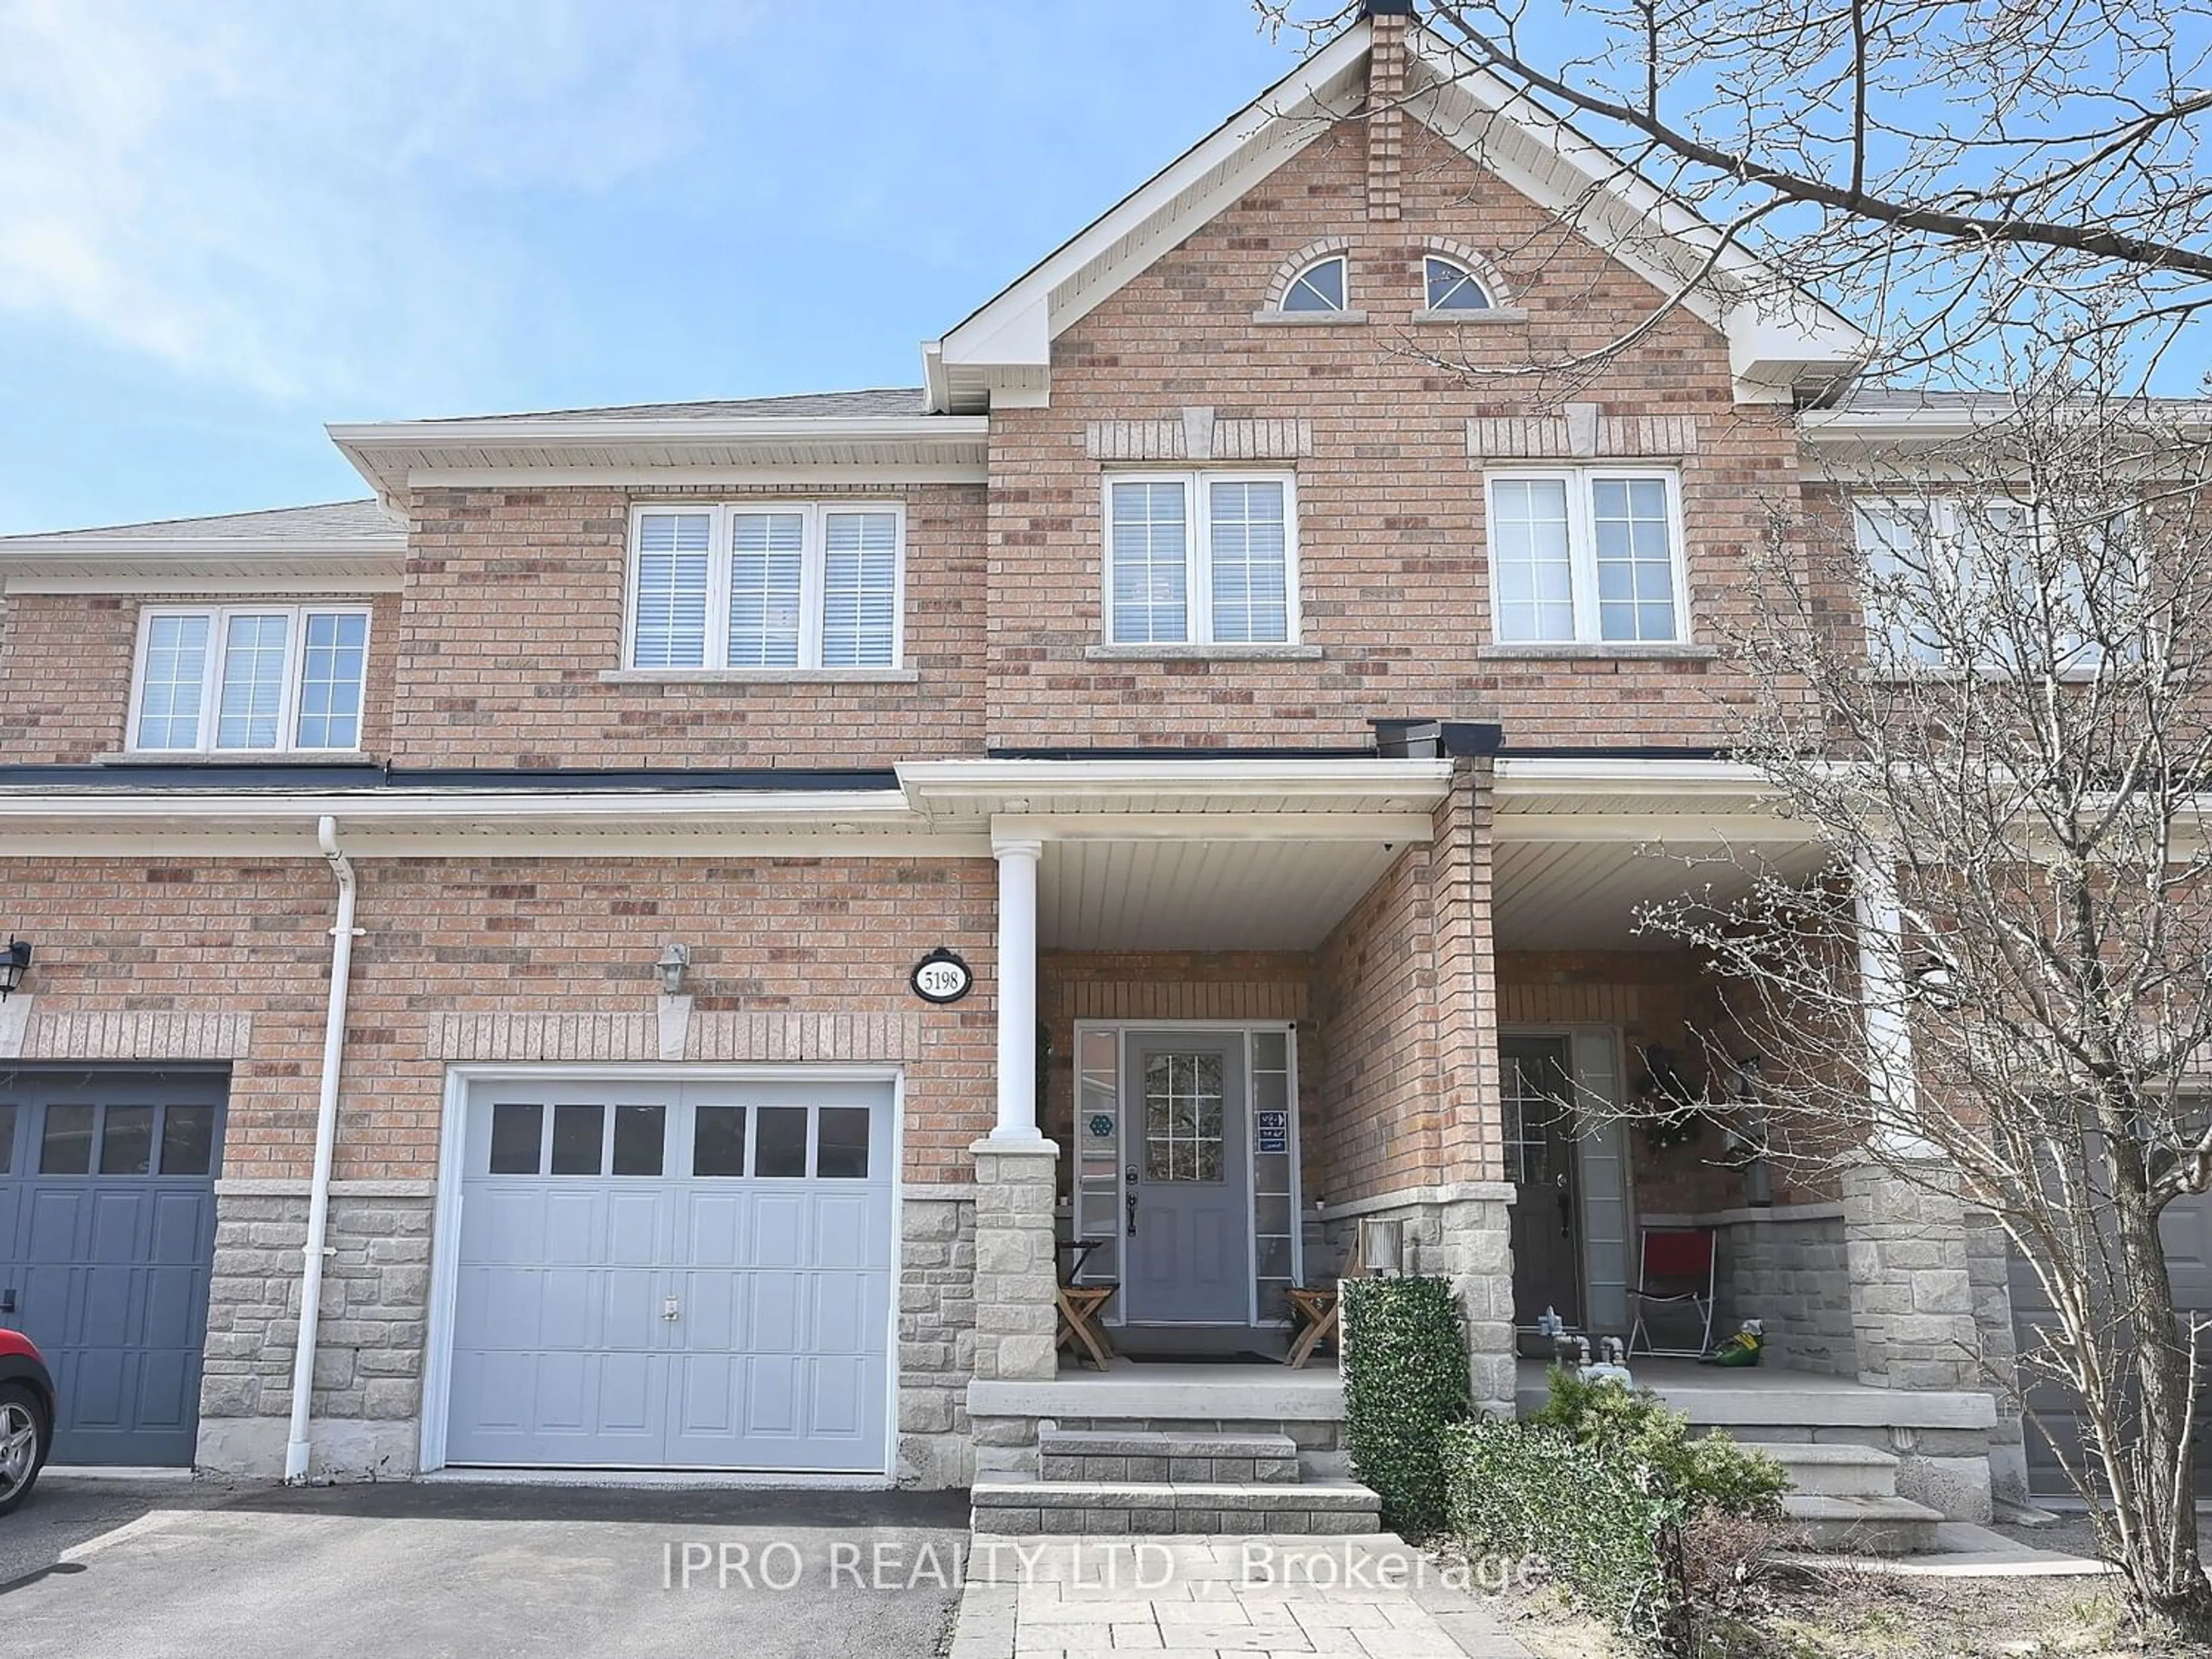 Home with brick exterior material for 5198 Angel Stone Dr, Mississauga Ontario L5M 0L4